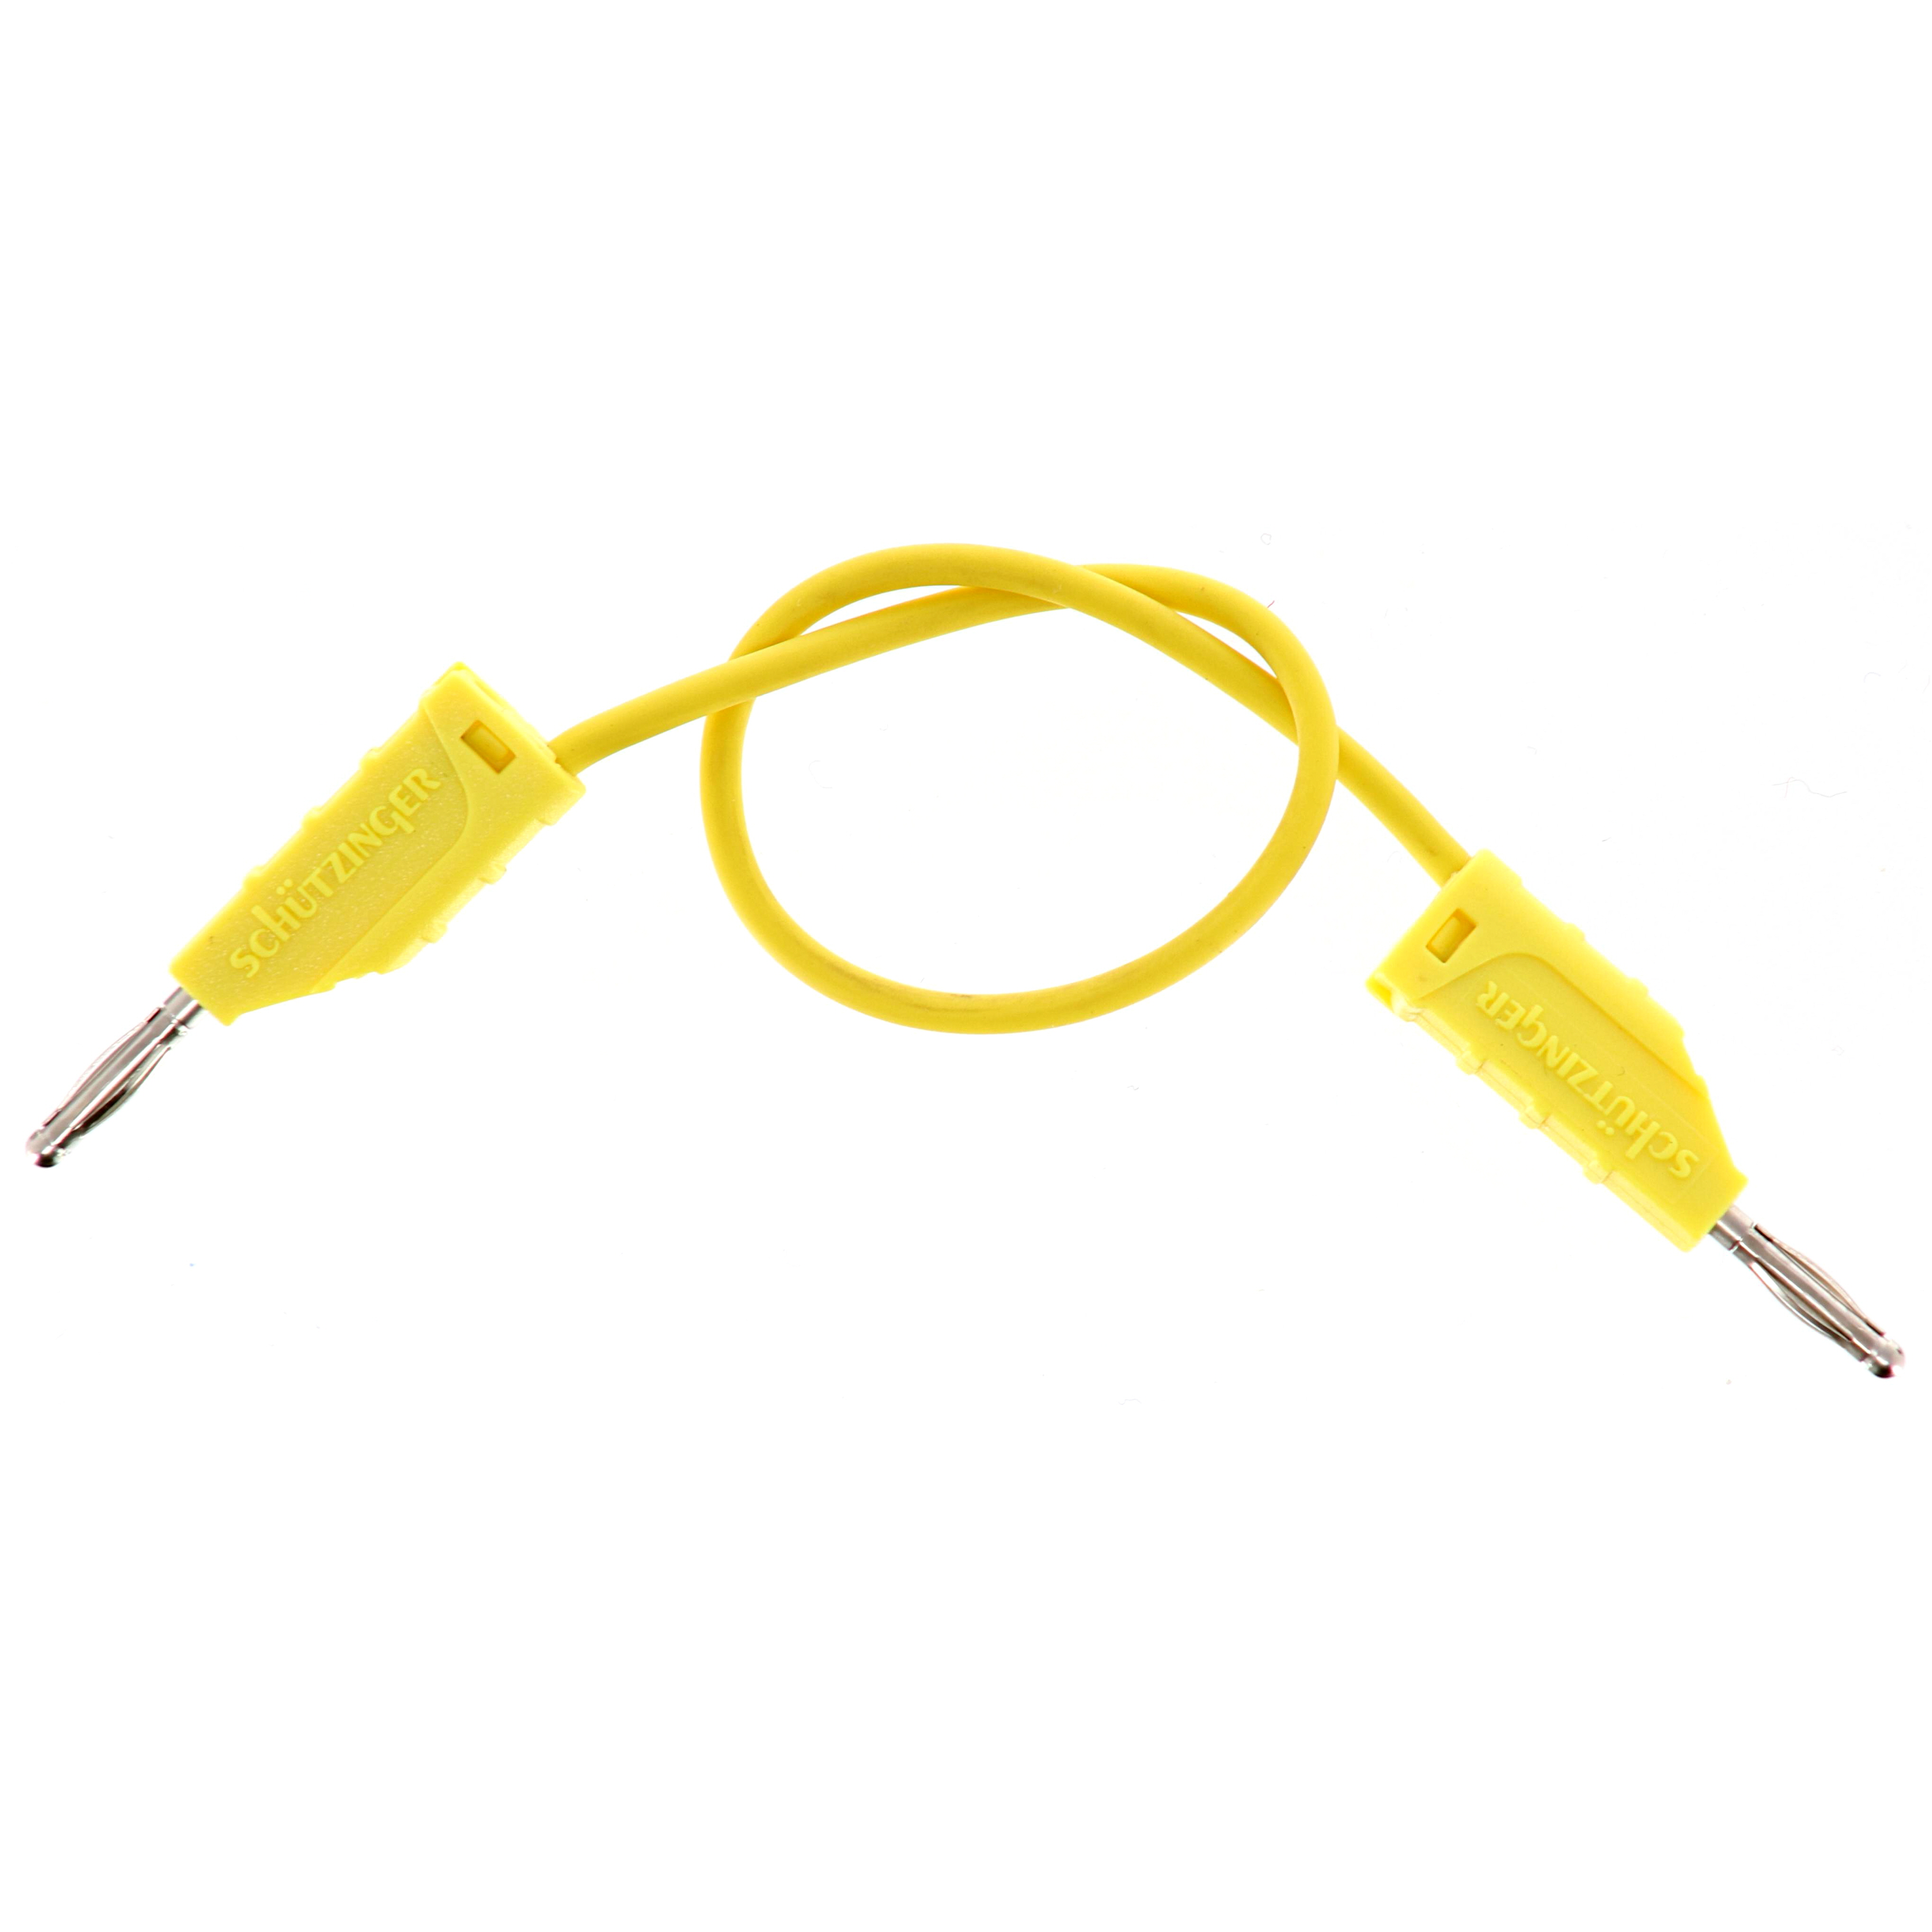 2mm Stackable Lead (15cm Long) - Yellow